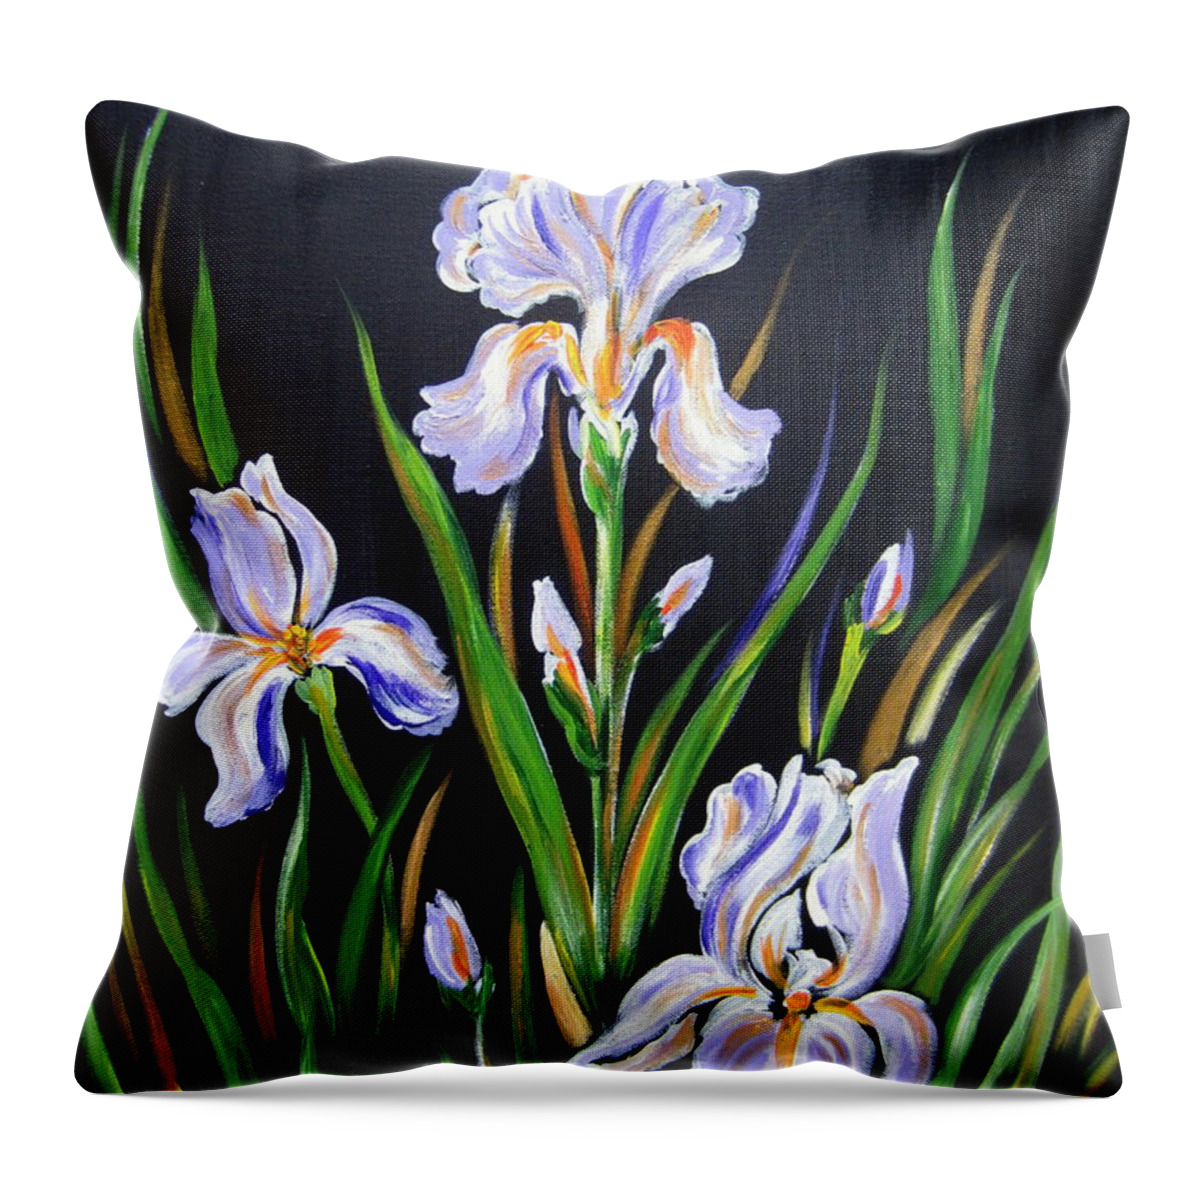 Floral Throw Pillow featuring the painting I love Irises by Roberto Gagliardi